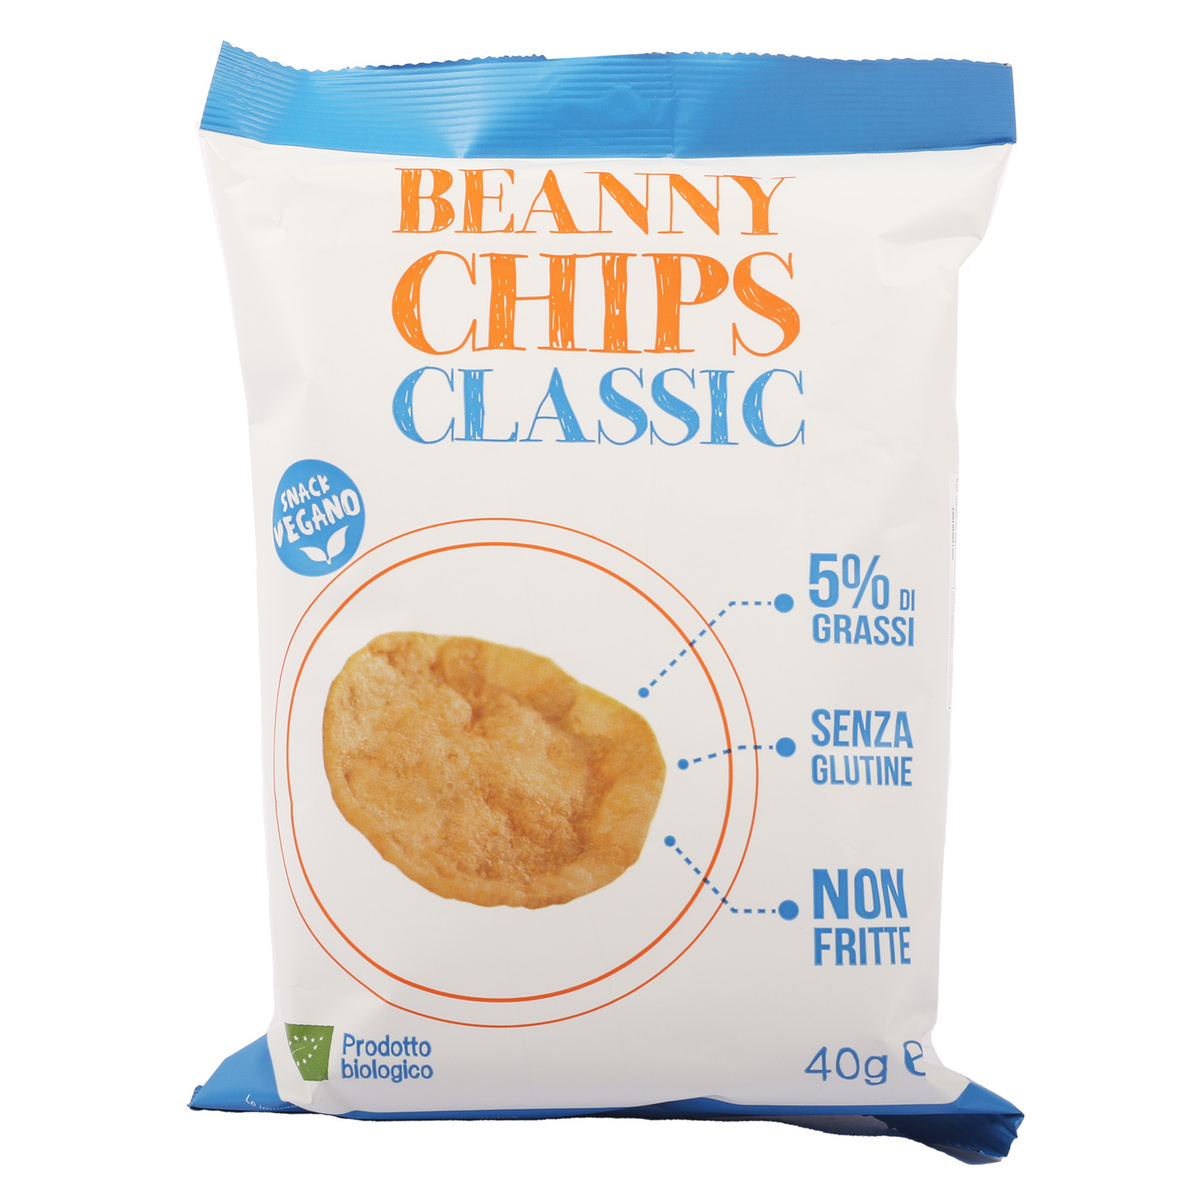 Beanny Chips Gluten Free Classic 40 g